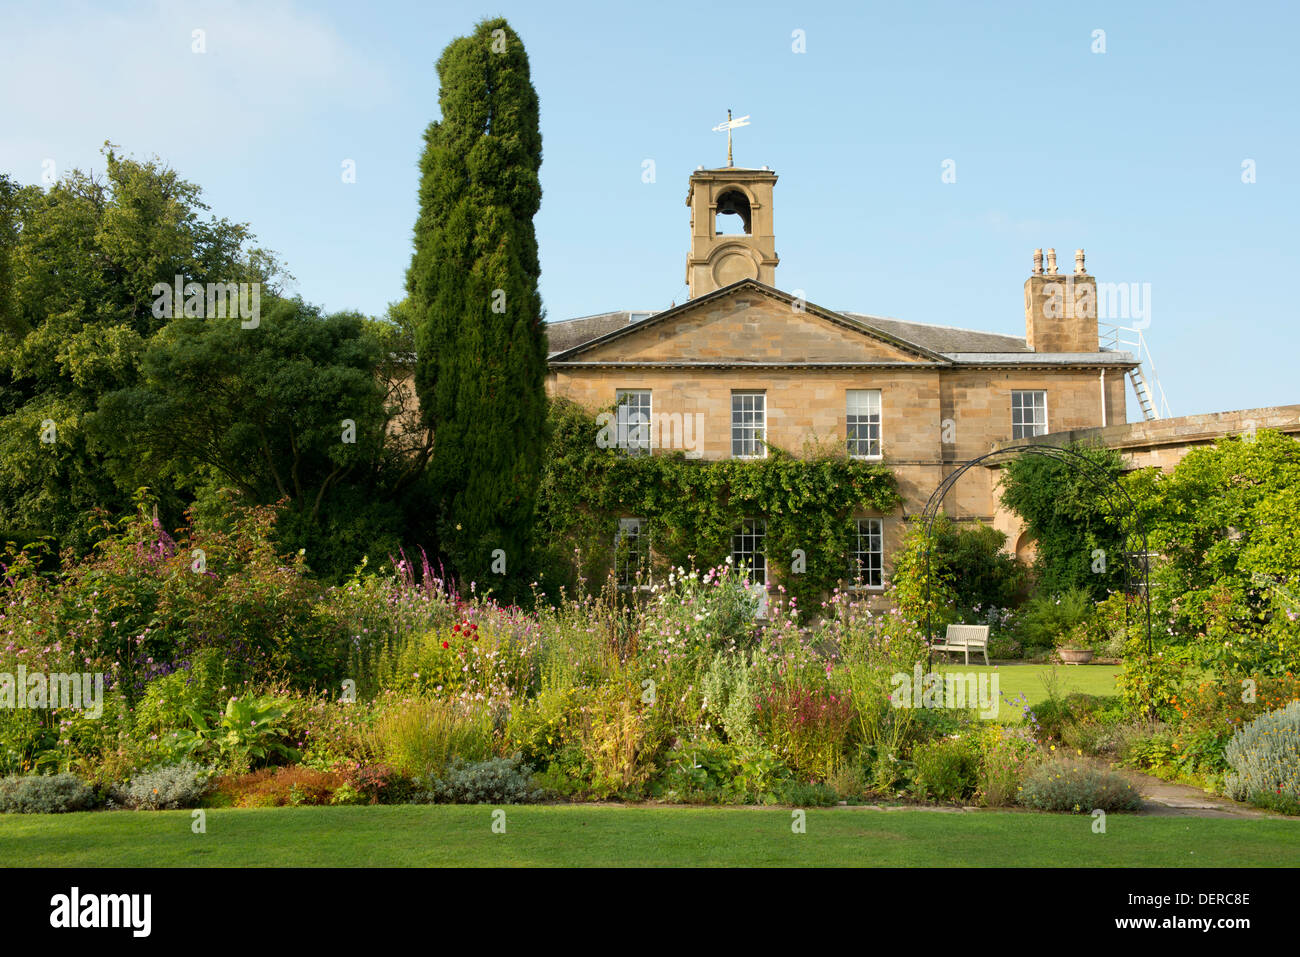 Le jardin de Howick Hall, Alnwick, Northumberland, Angleterre Banque D'Images